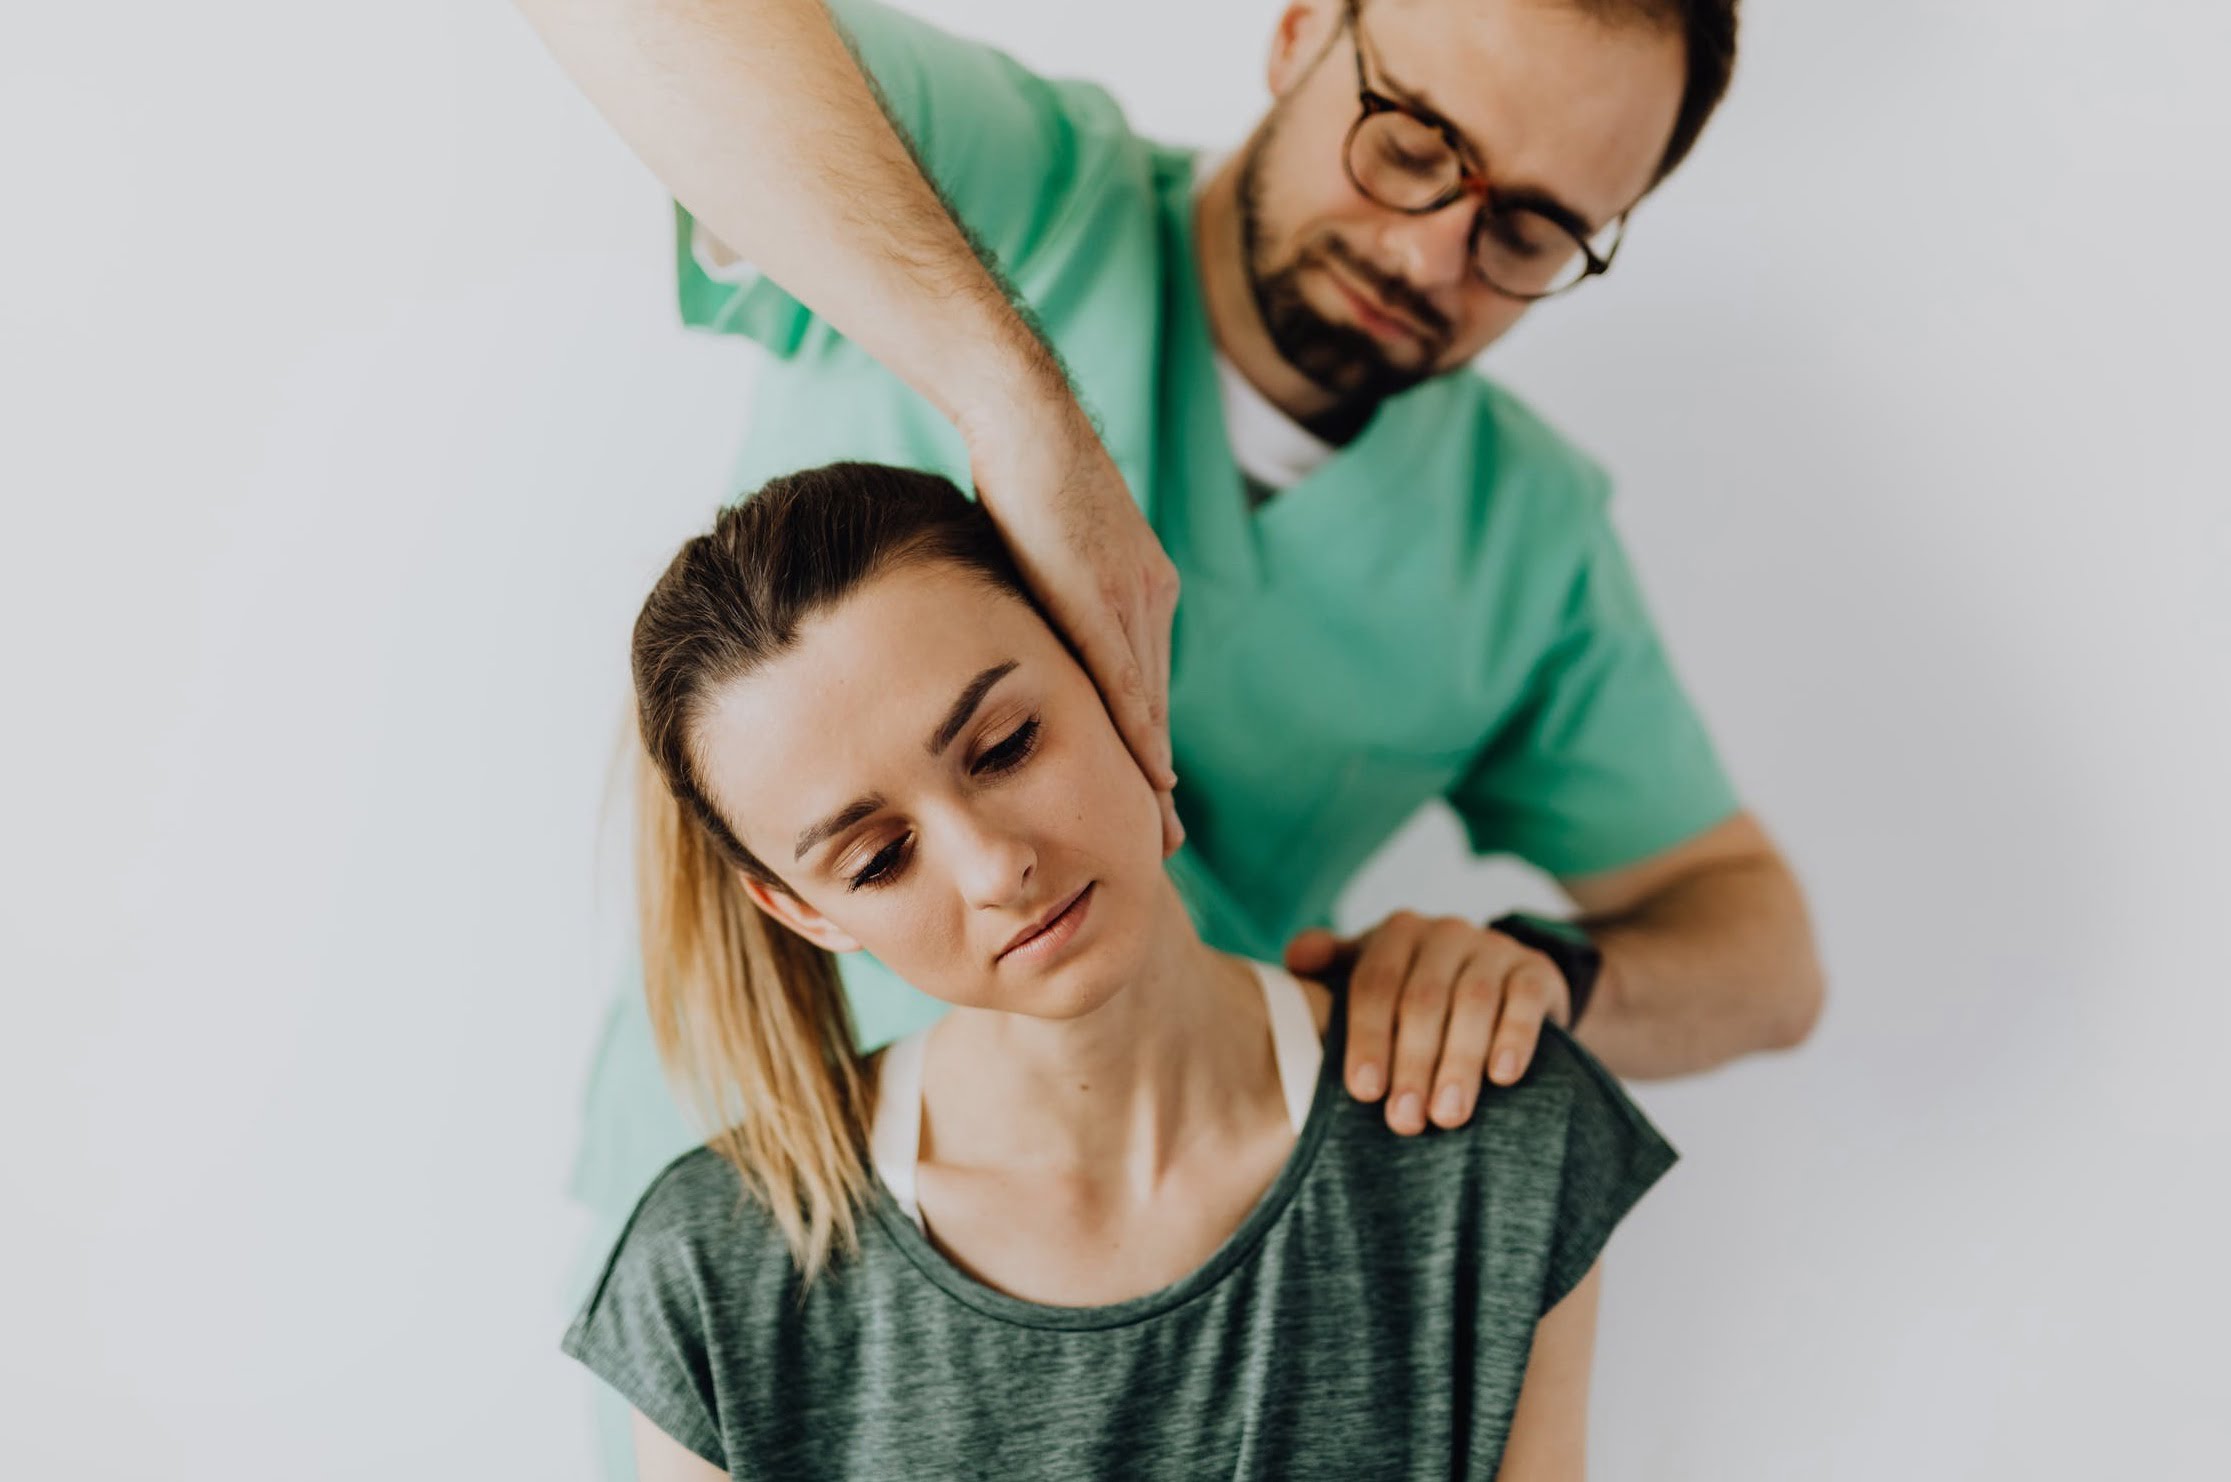 Man performing chiropractic care on woman